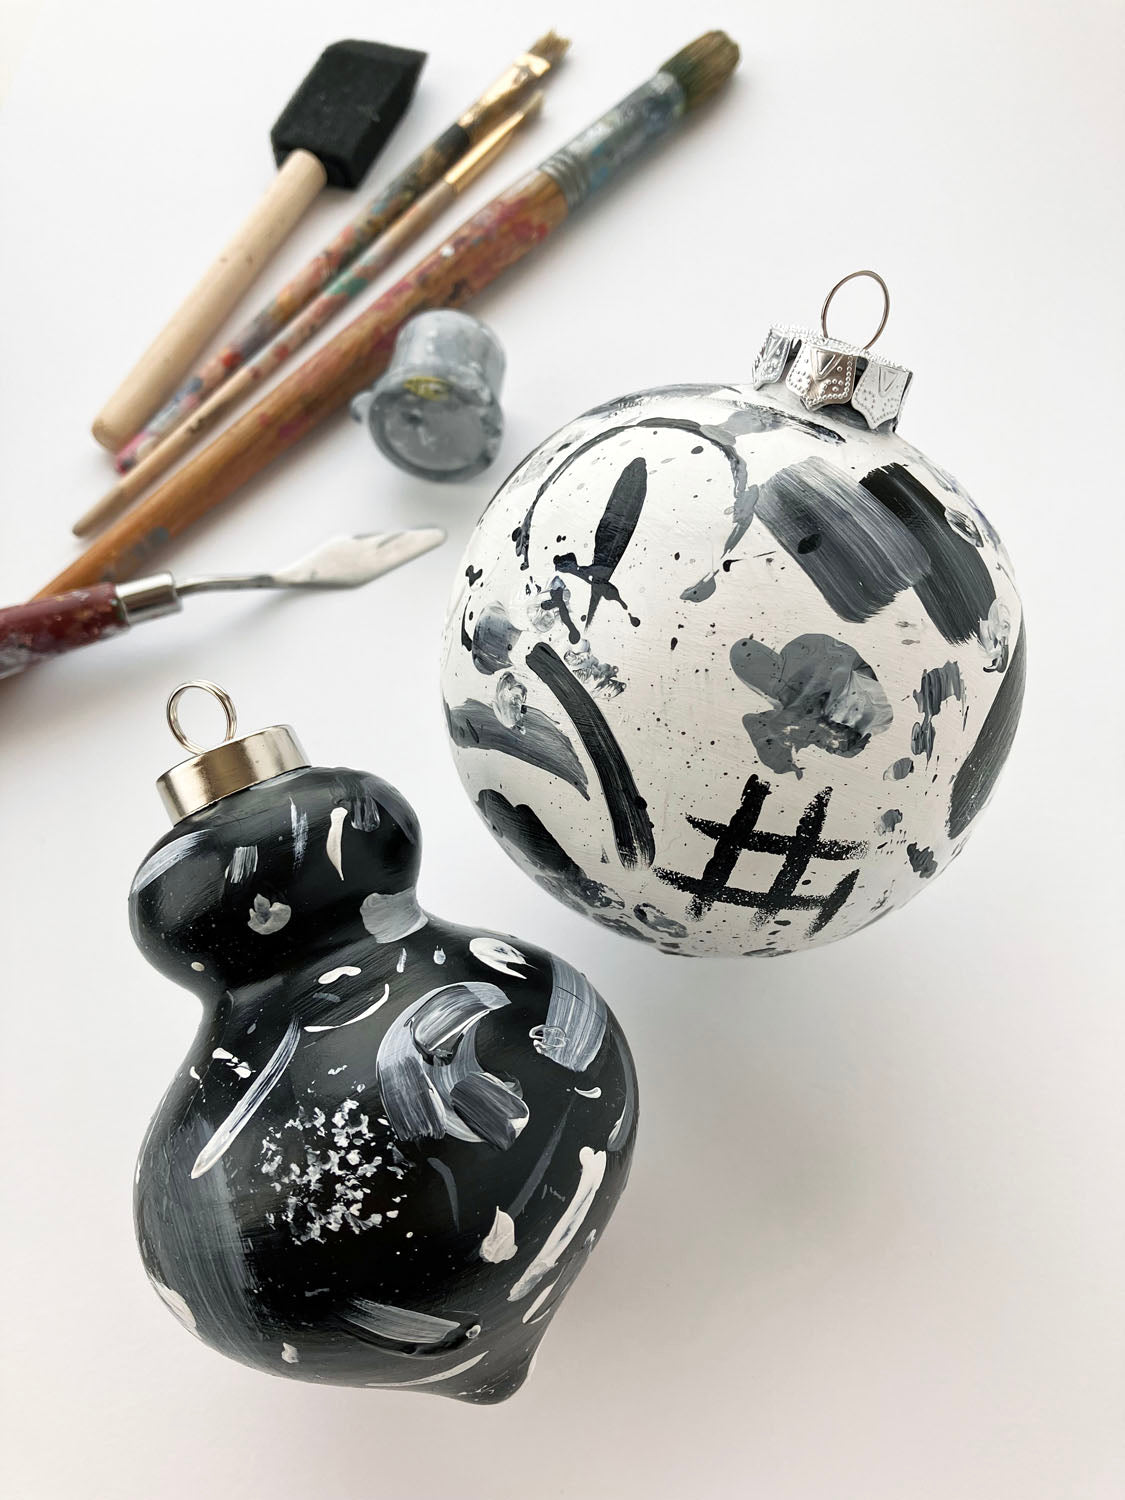 Hand Painted Ceramic Ornament #1 - Black & White Abstract, Round White Ornament